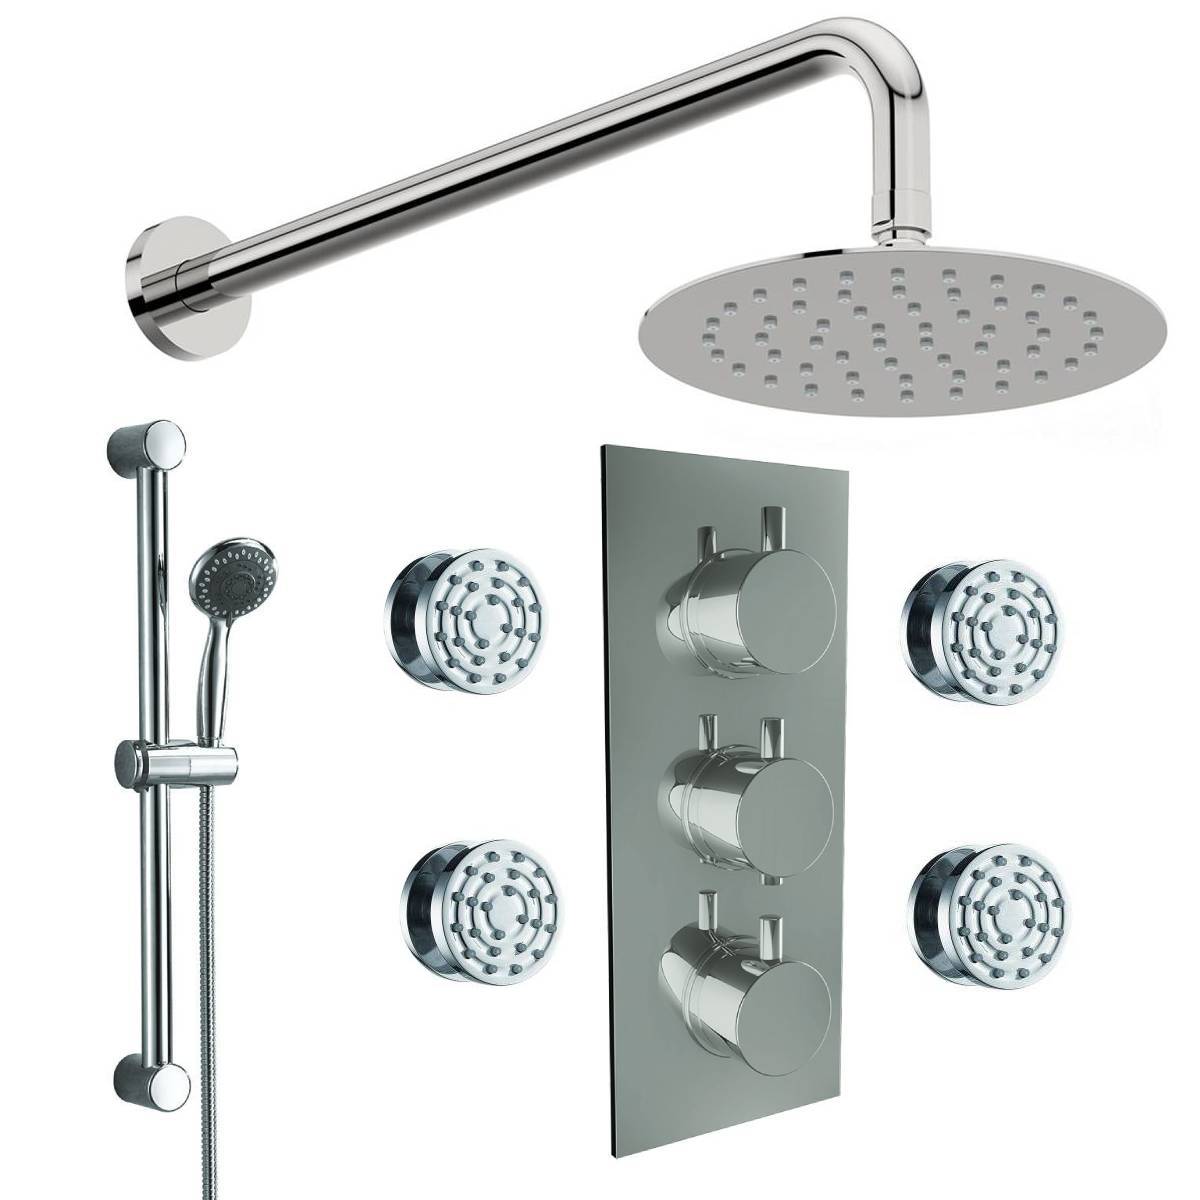 Round Triple Thermostatic Concealed Mixer Shower Kit with Wall Mounted 300mm Shower Head, Slide Rail Kit & Body Jets (12475)